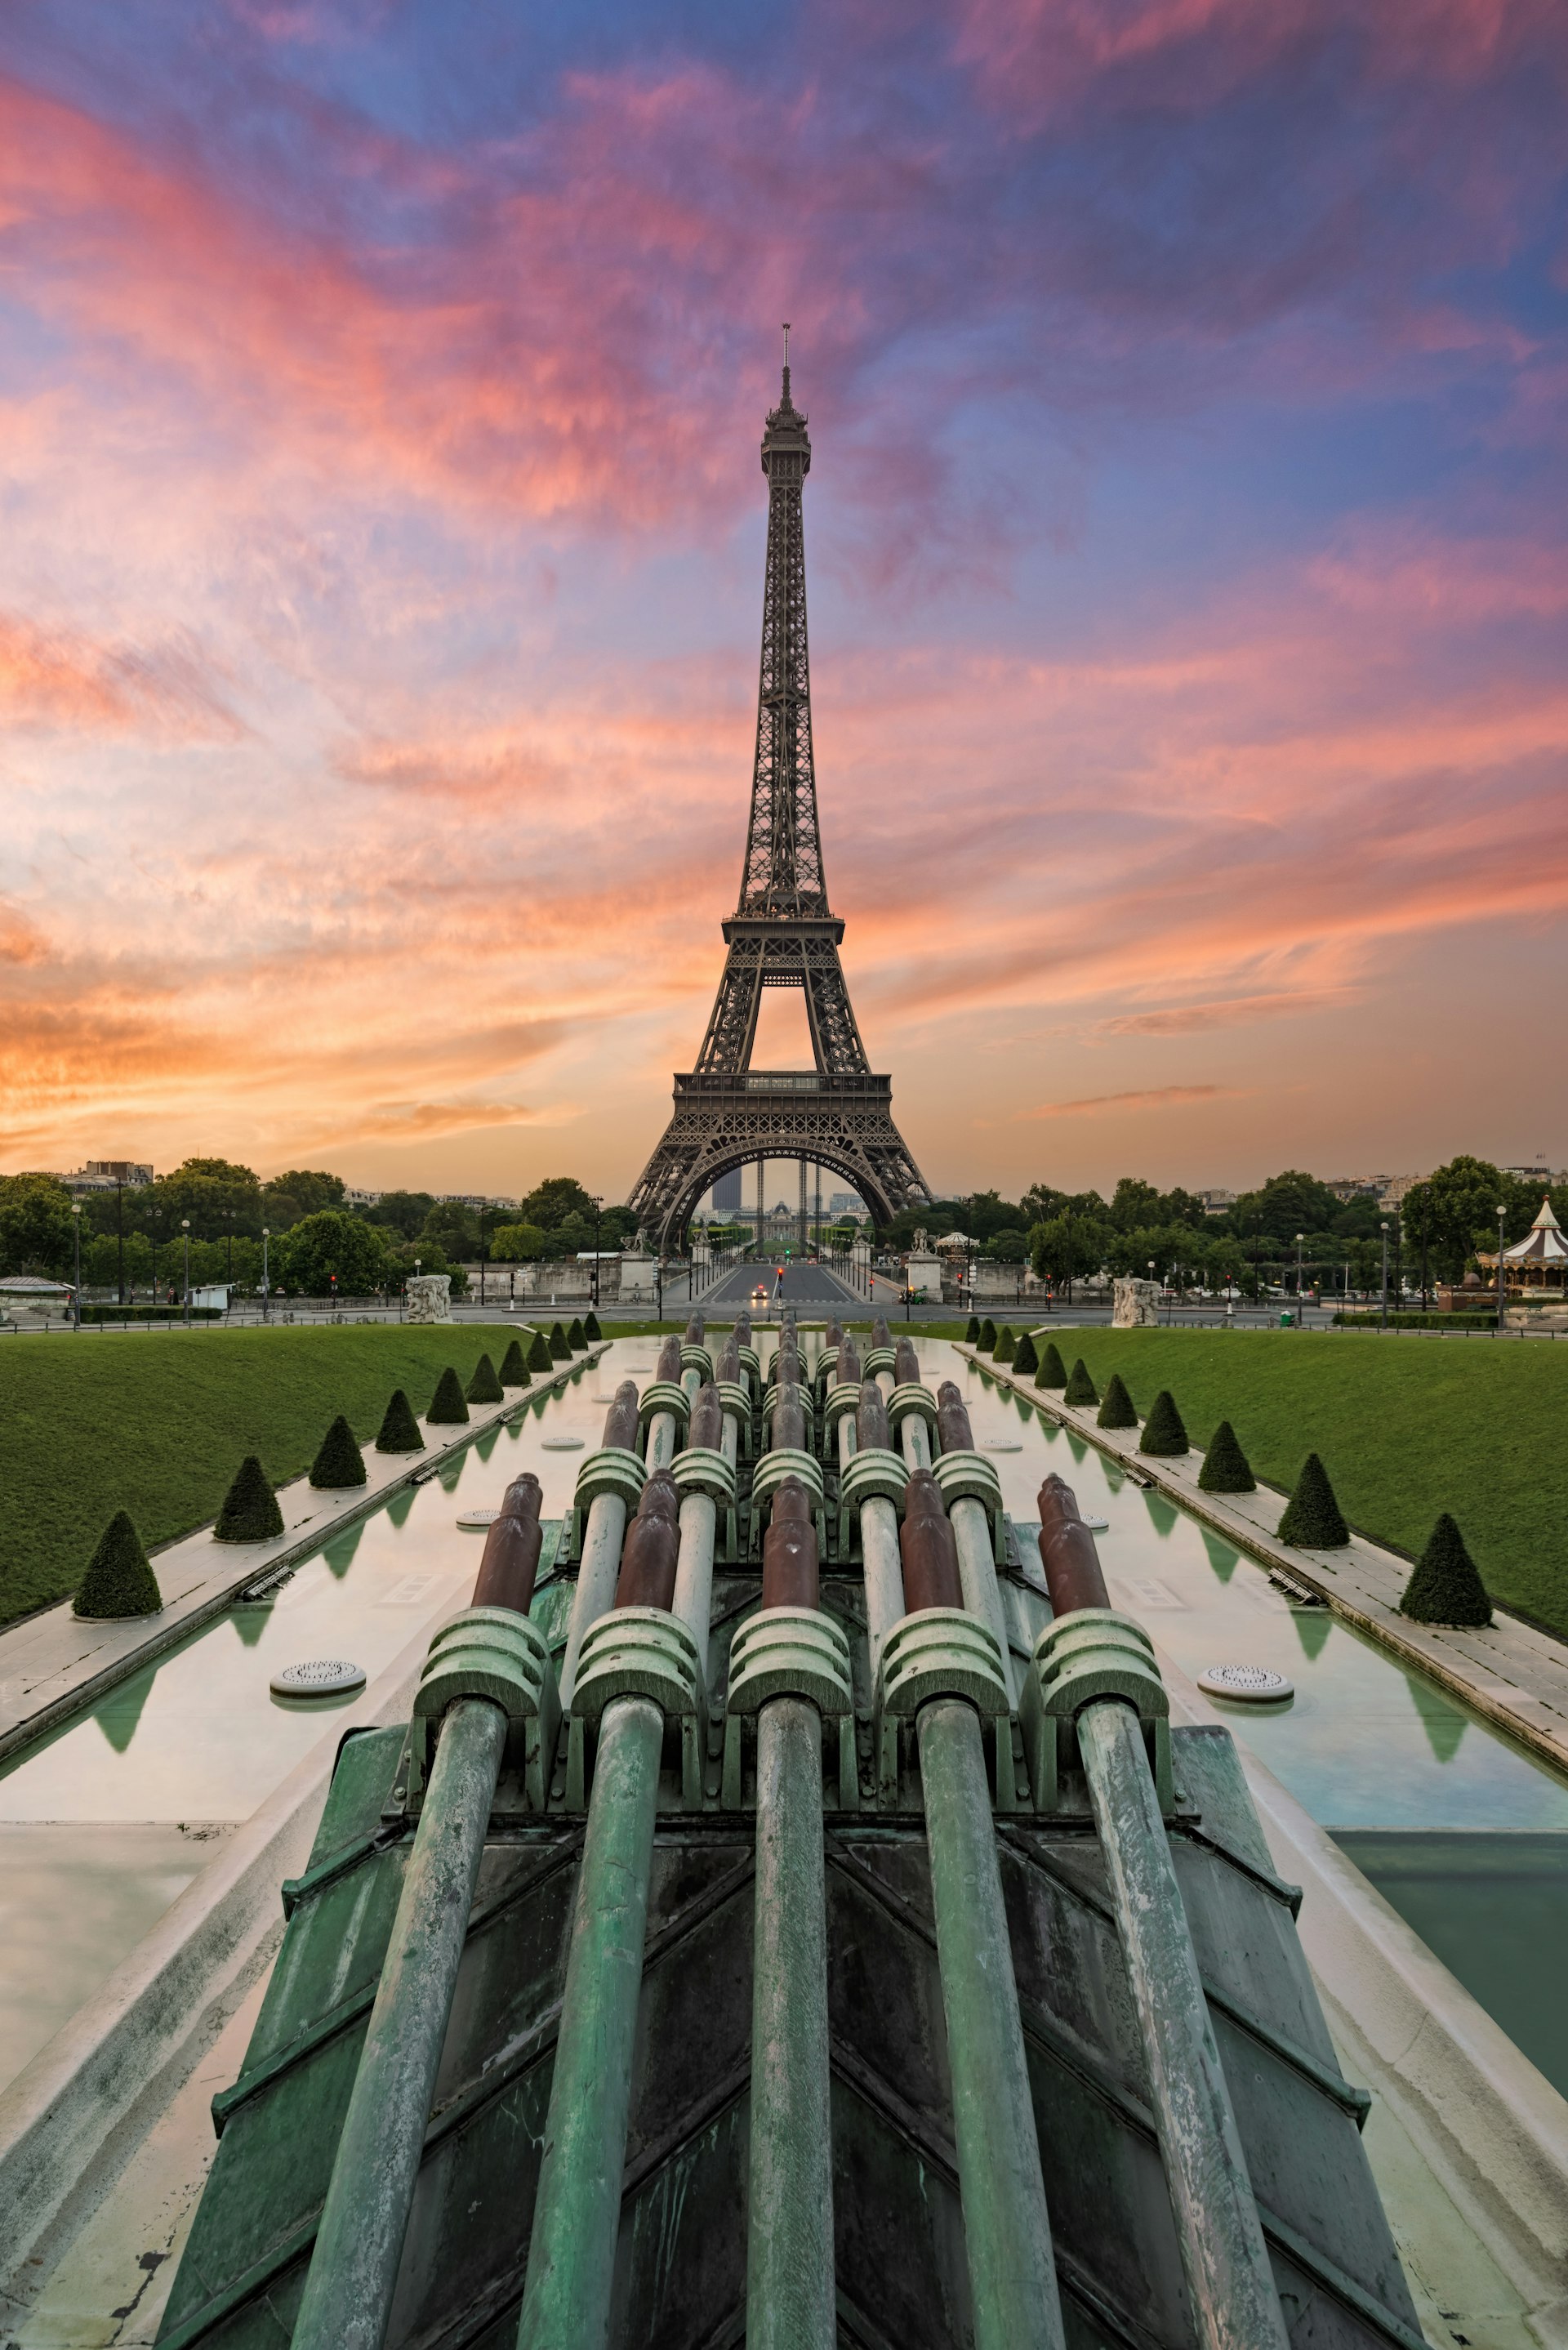 The Eiffel Tower at sunrise. The sky is blue and pink behind the structure.